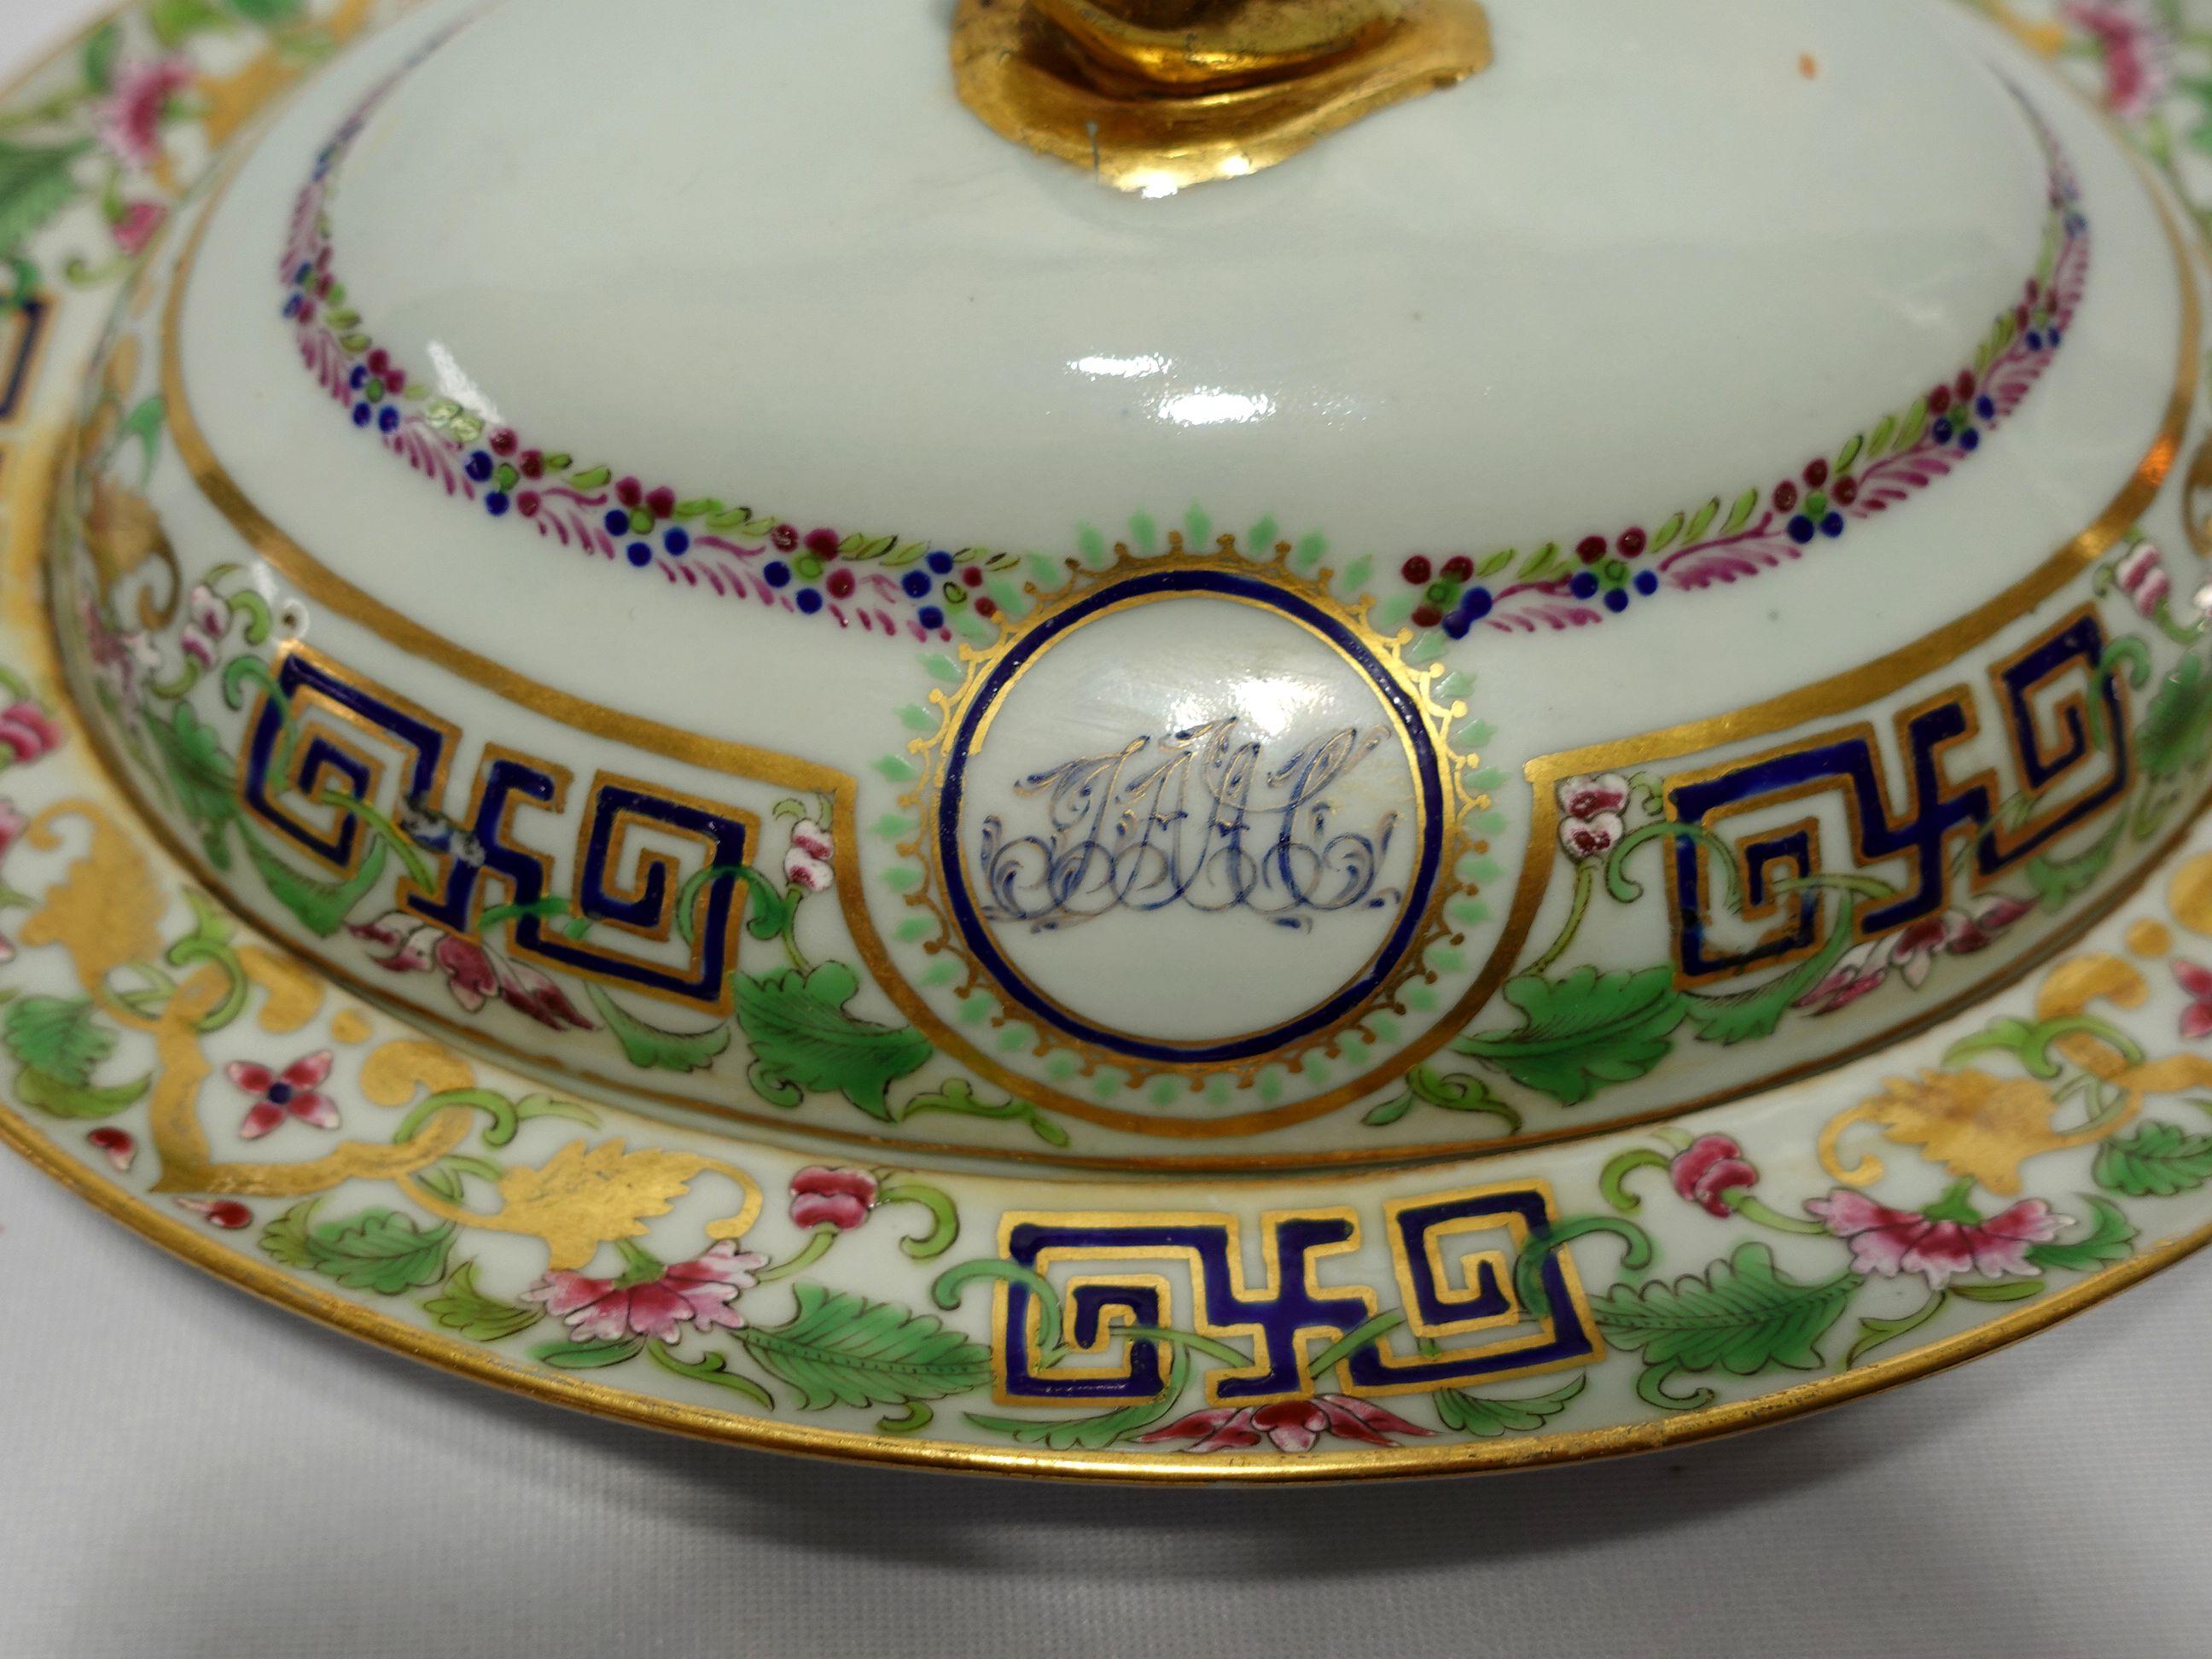 Chinese Export Monogrammed Covered Serving Dish, 19th century In Good Condition For Sale In Norton, MA